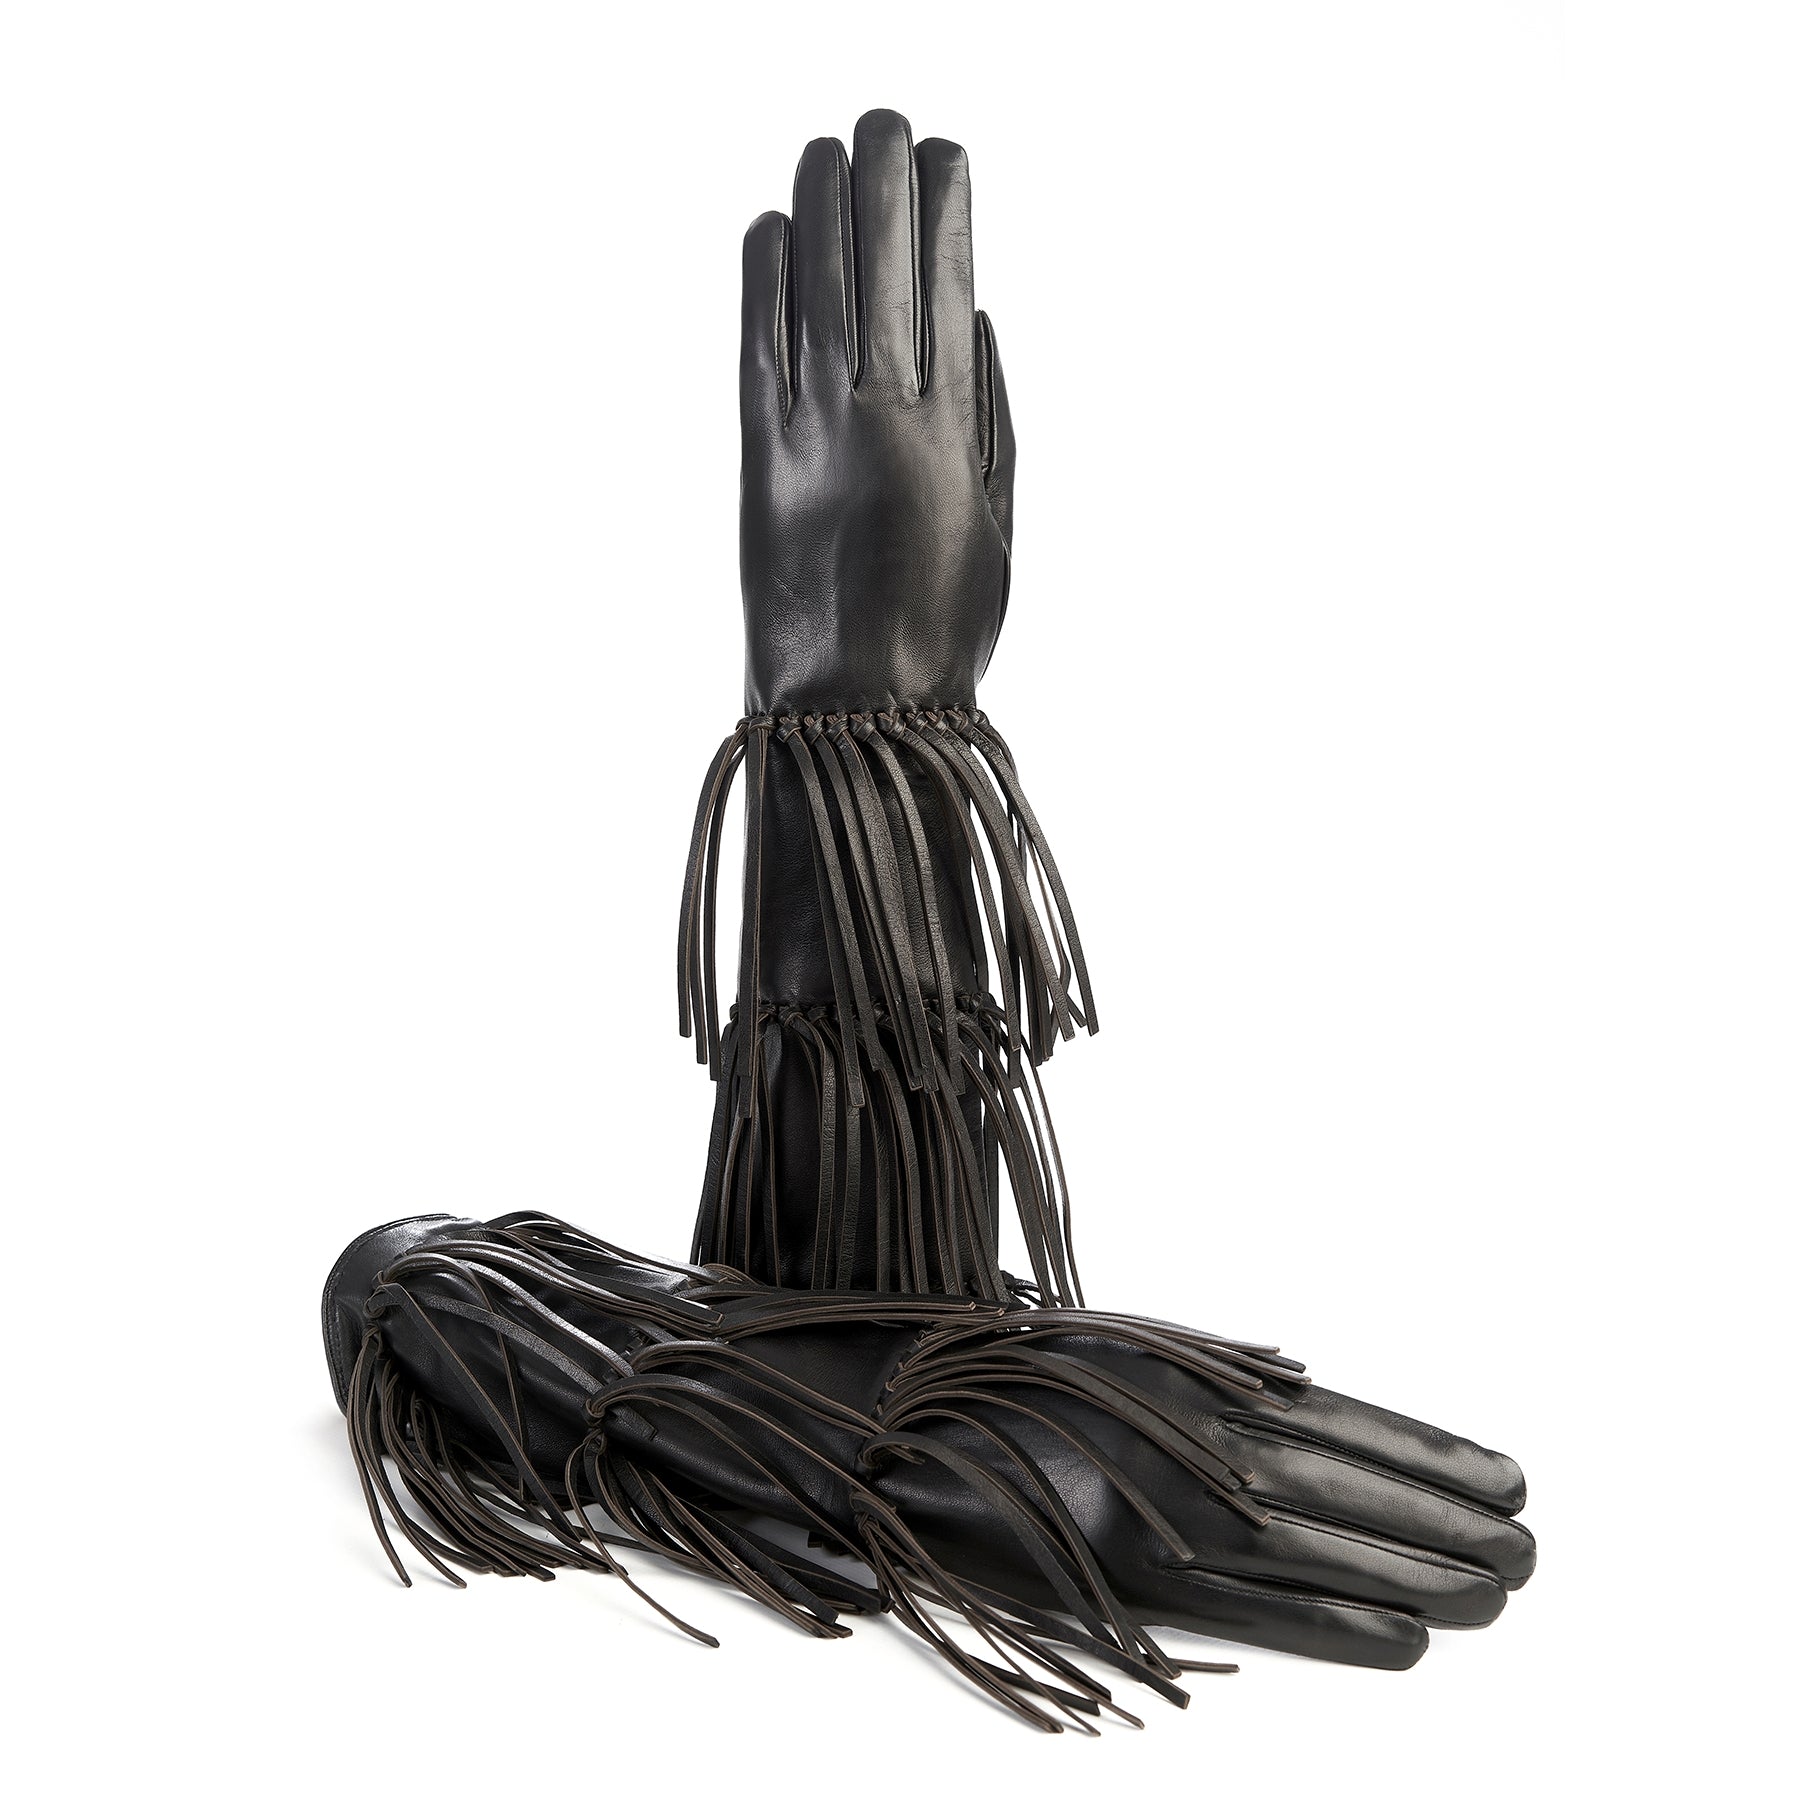 Women's black leather gloves with fringes silk lined